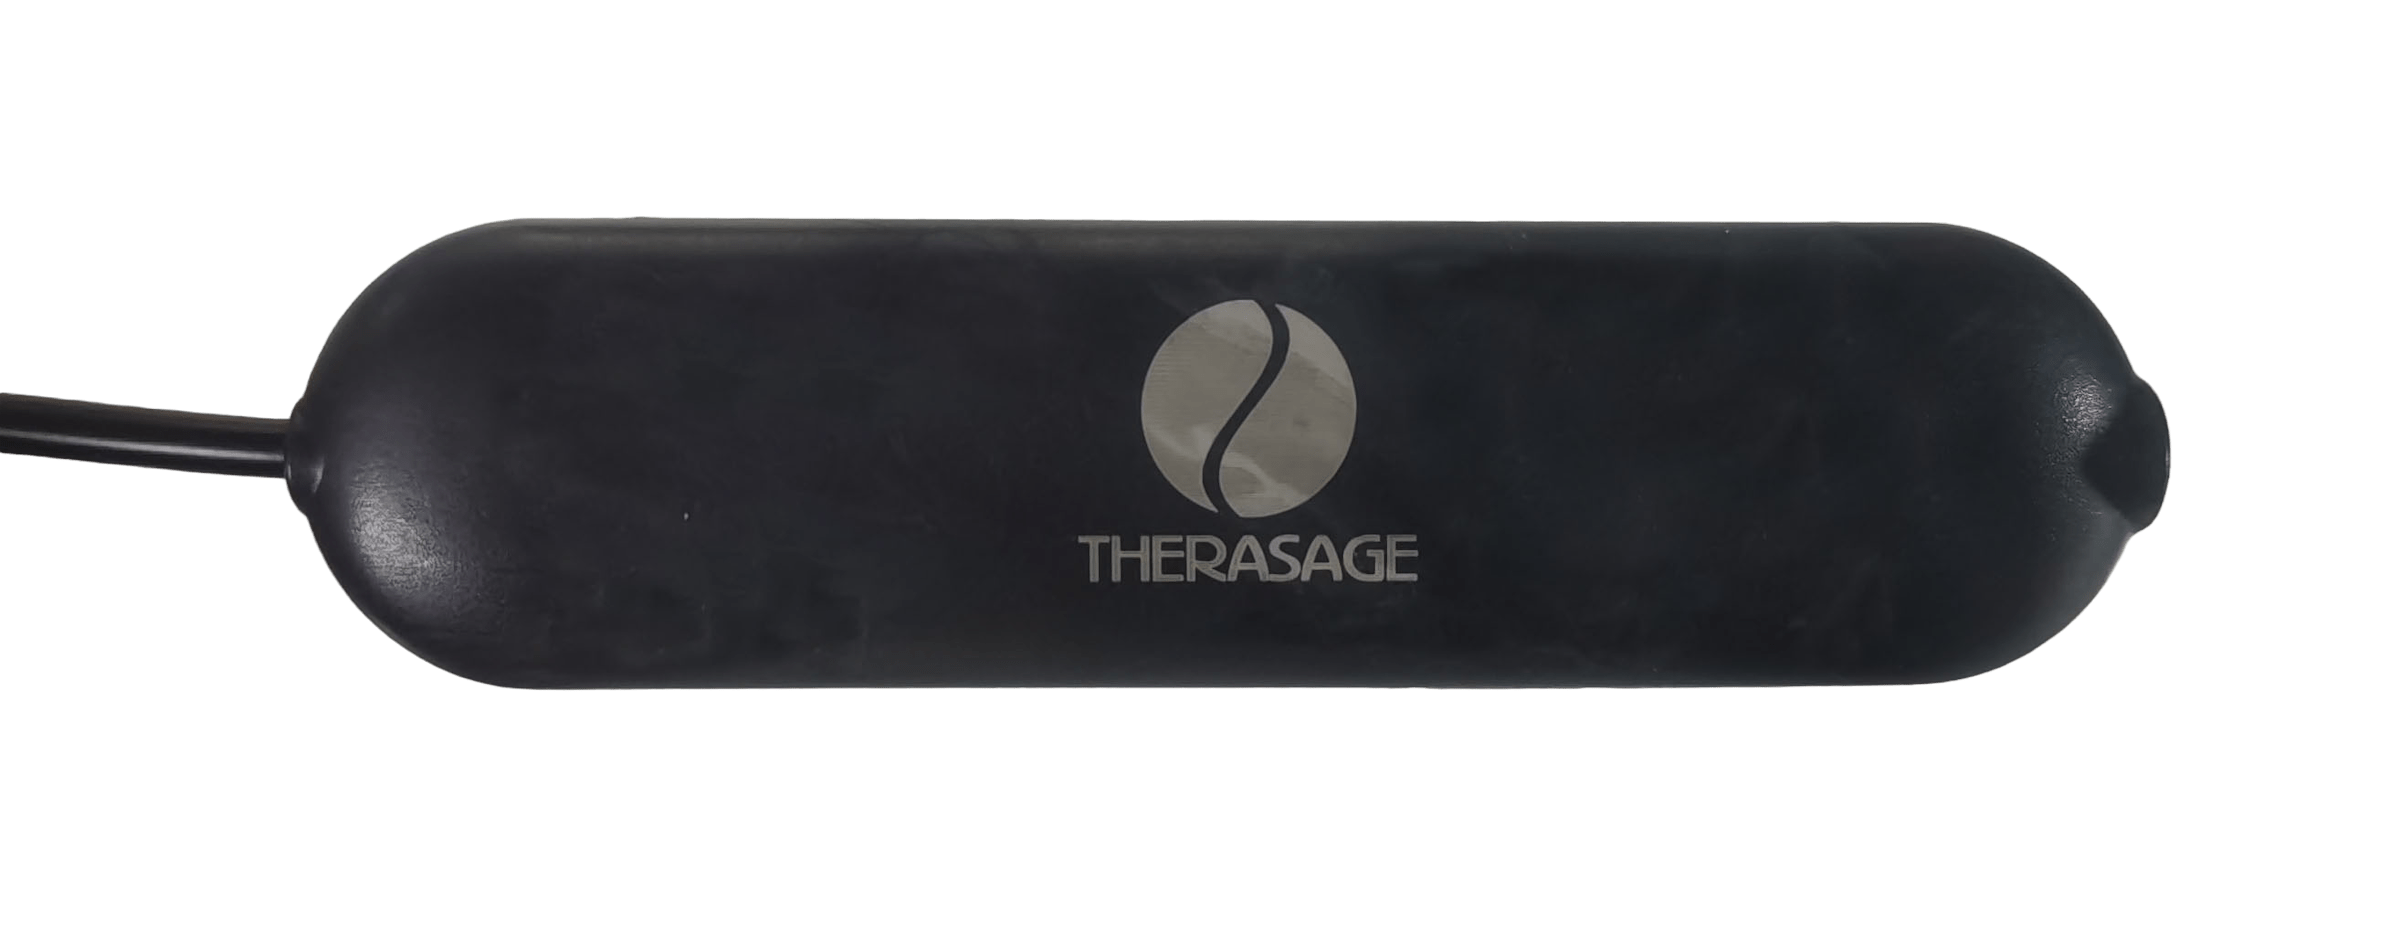 Therasage All Therasage TheraD-Lite (Red light, near infrared, UV, 2x Pulsation)